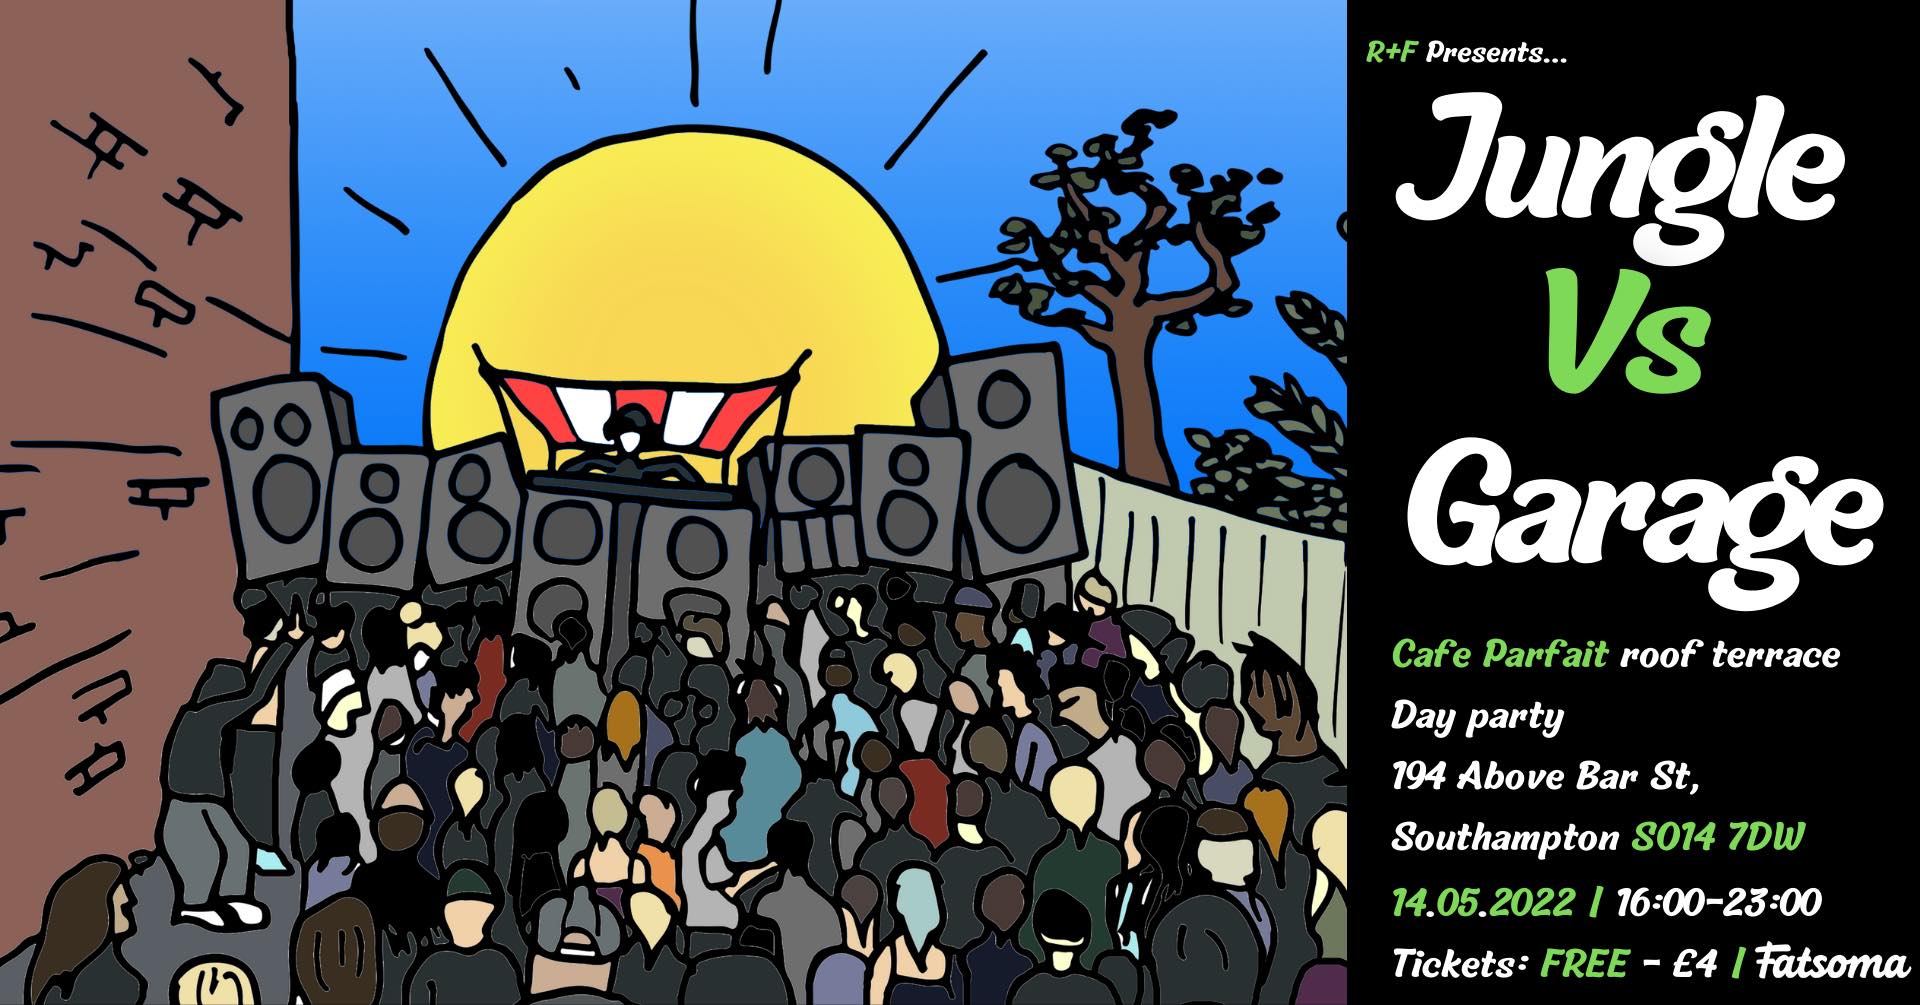 R+F Presents: Jungle vs Garage Rooftop Day Party